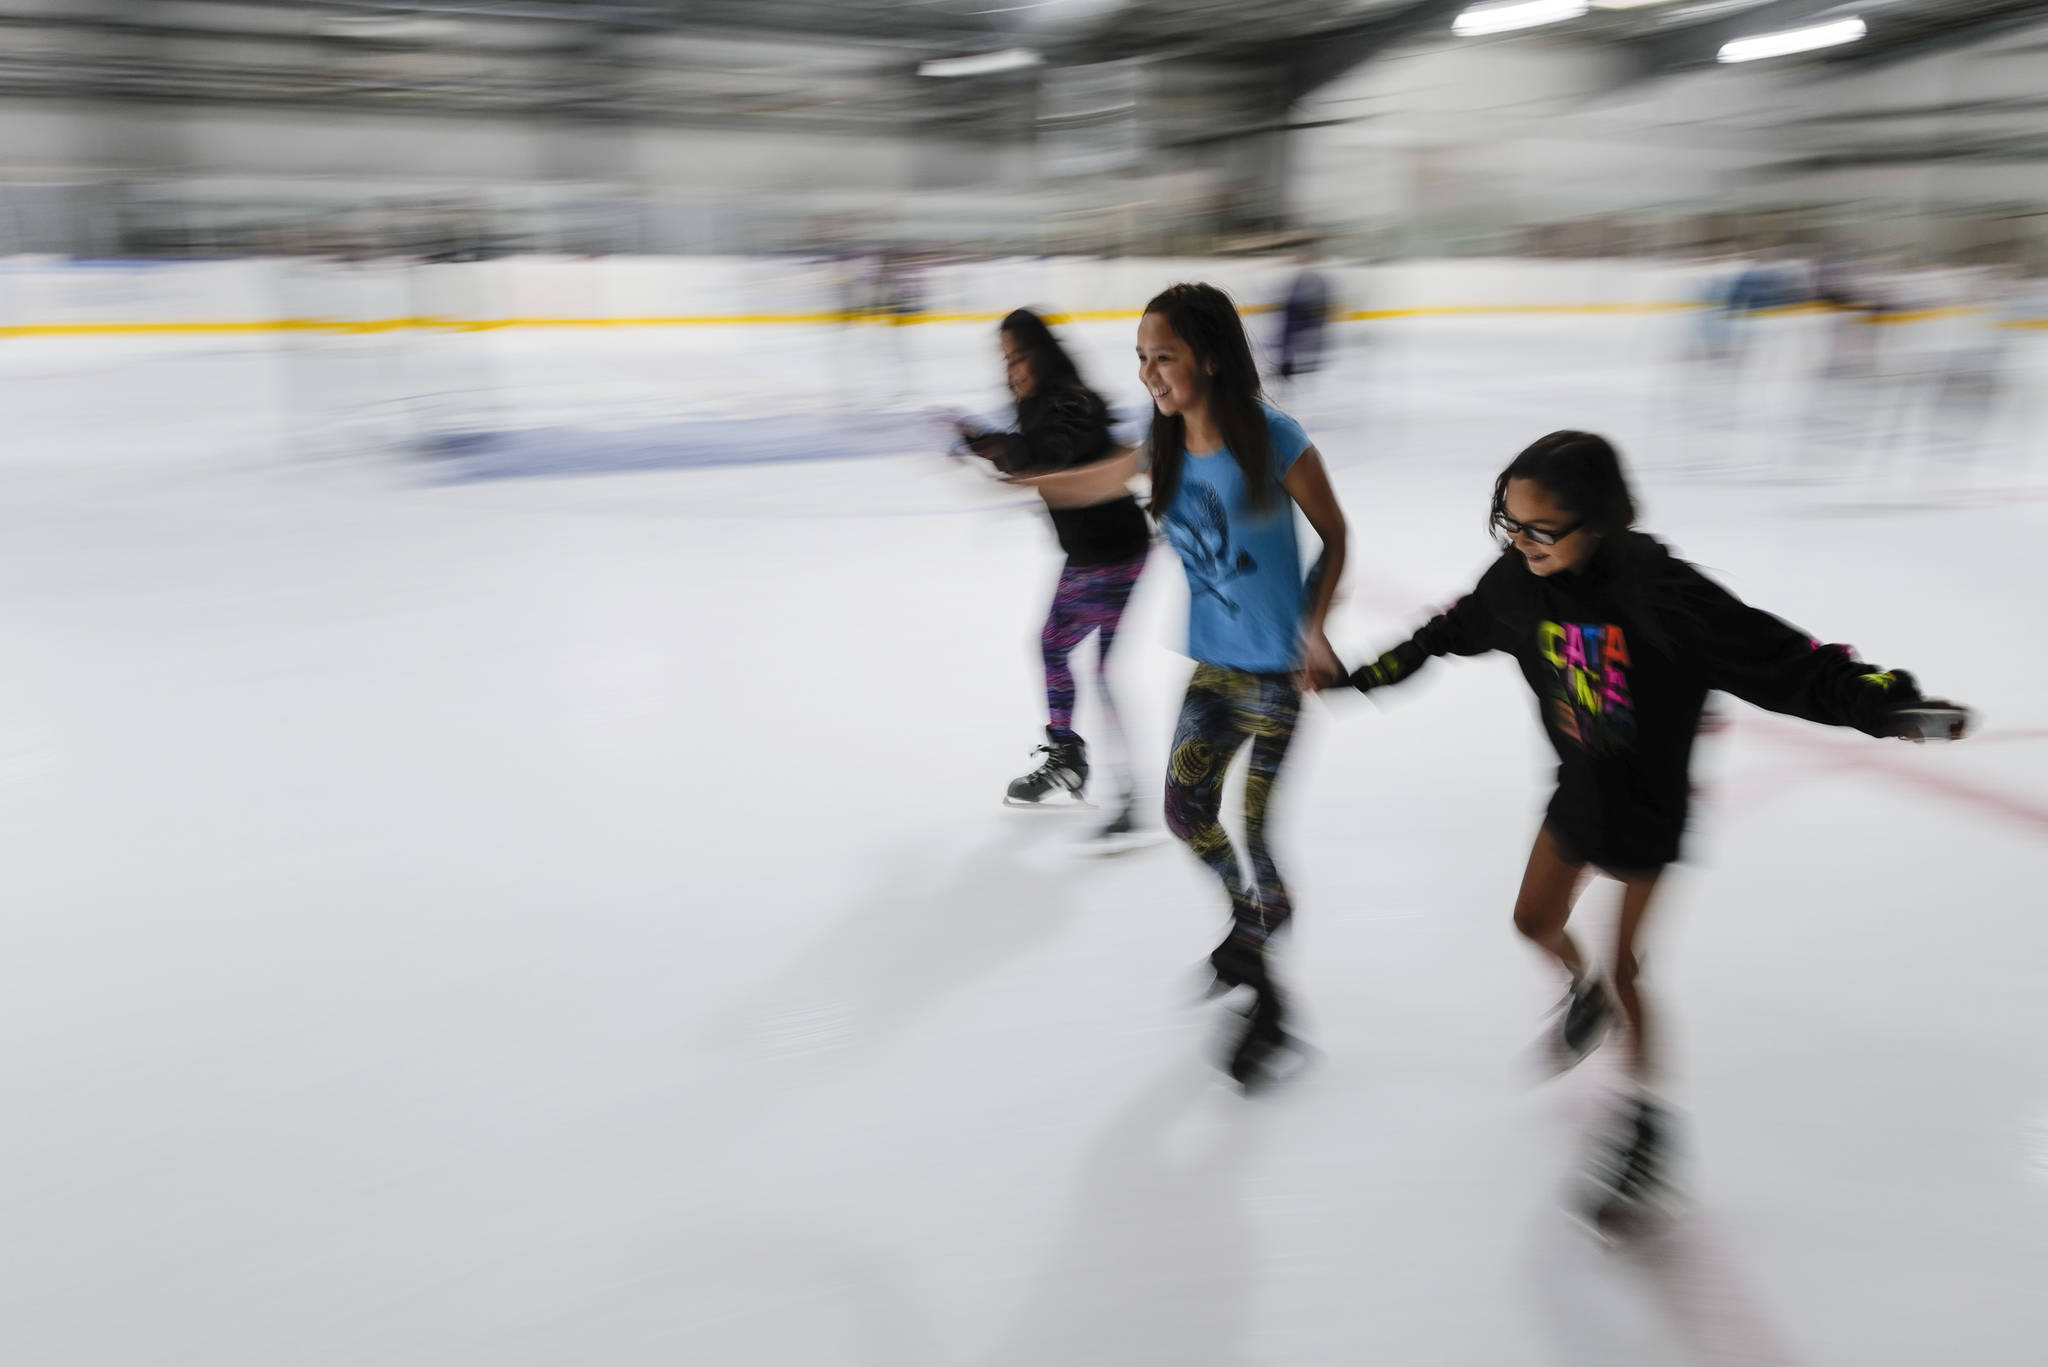 Christianna Lott, 12, left, Lashya Bagoyo, 12, center, and Malaya Willard, 10, hold hands as they skate during a free skate on the opening day at the Treadwell Arena on Monday, Aug. 5, 2019. (Michael Penn | Juneau Empire)